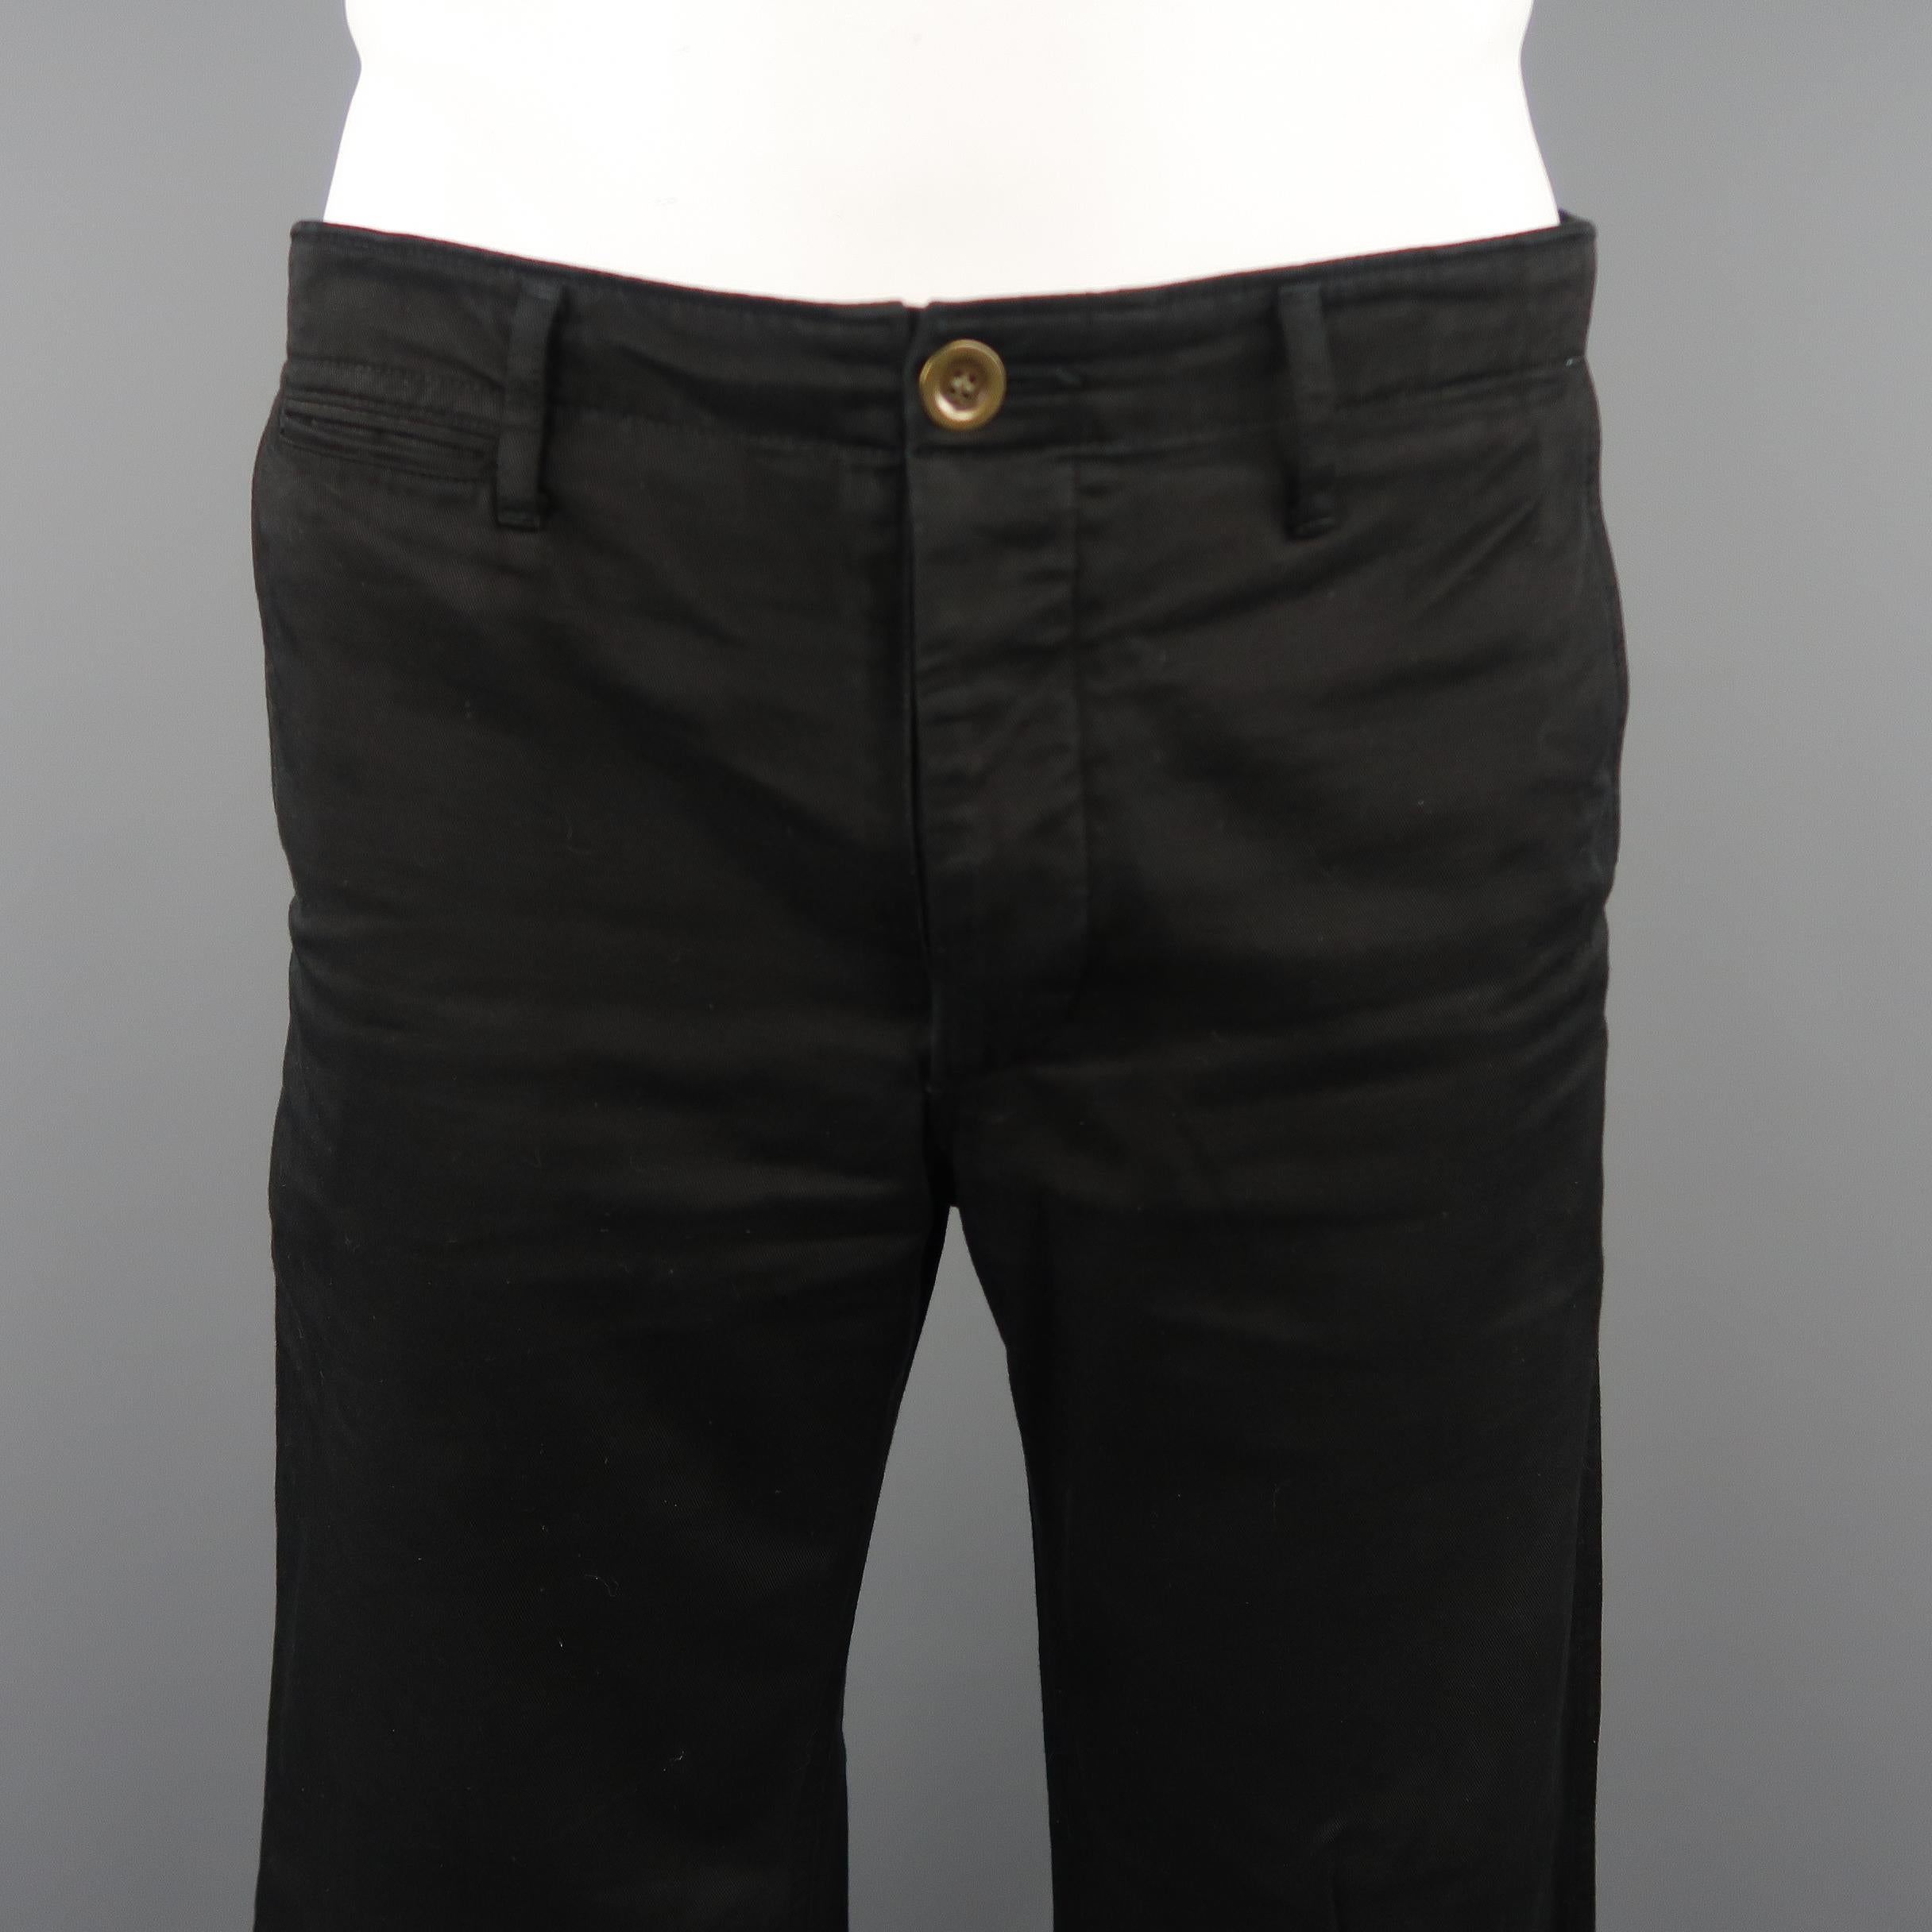 VISVIM slim chino giza casual pants come in black solid cotton material, with button fly, seam and slit pockets and back belt. Featuring light signs of wear throughout. With original package (envelope). 

Made in Japan. 
Good Pre-Owned